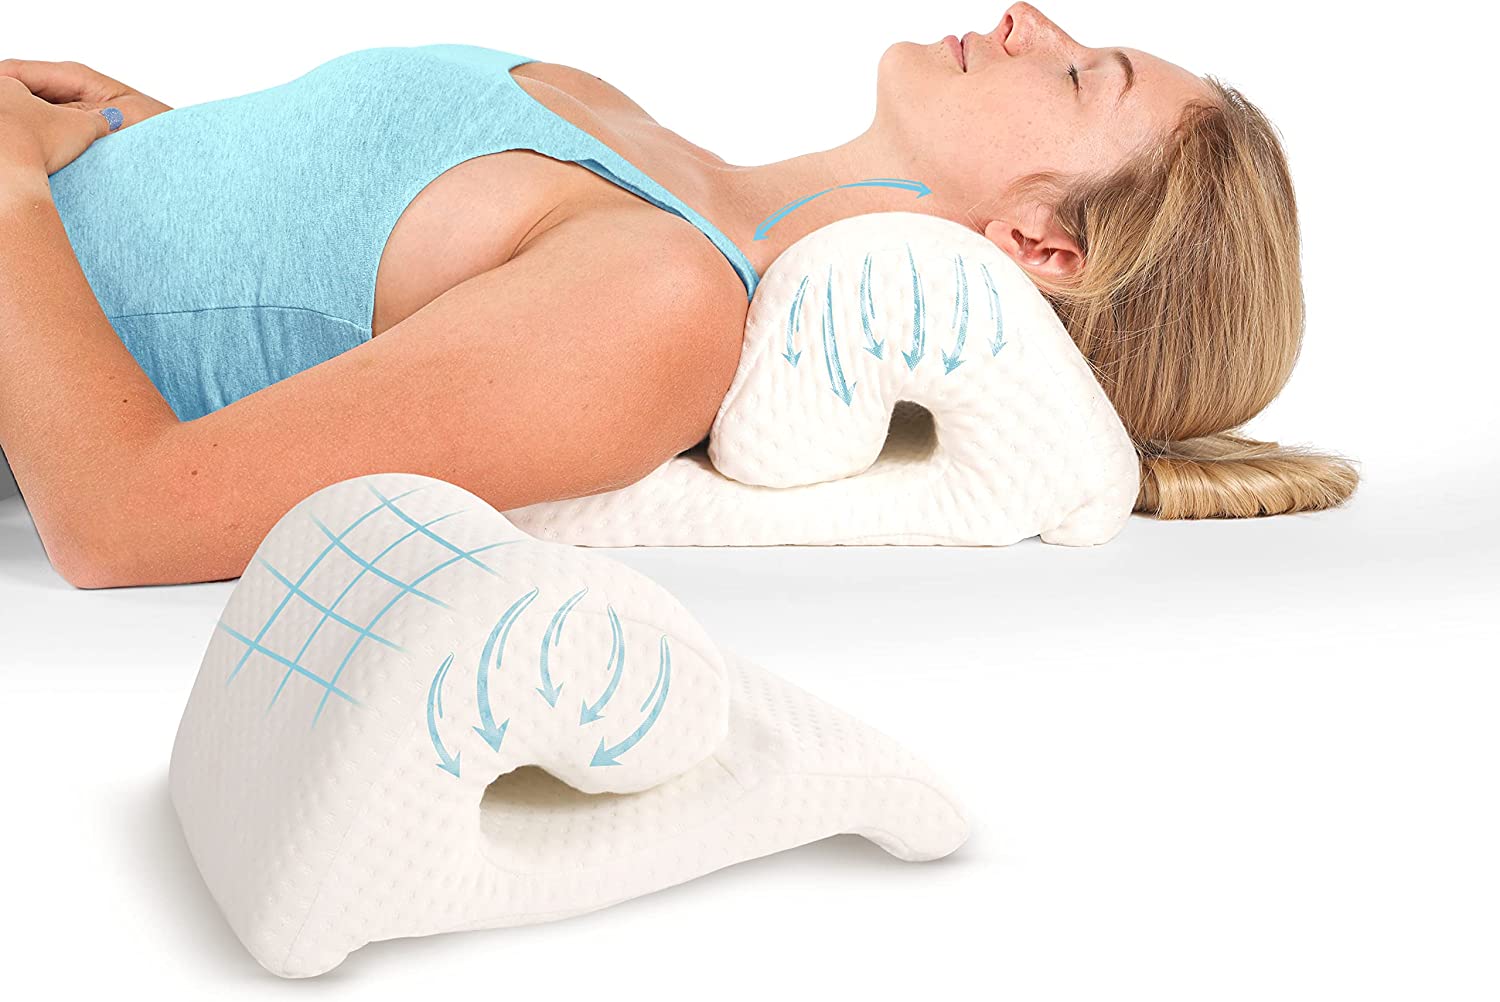 Car Seat Neck Pillow And Lumbar Support Cushion Kit For Muscle Pain And  Tension Relief